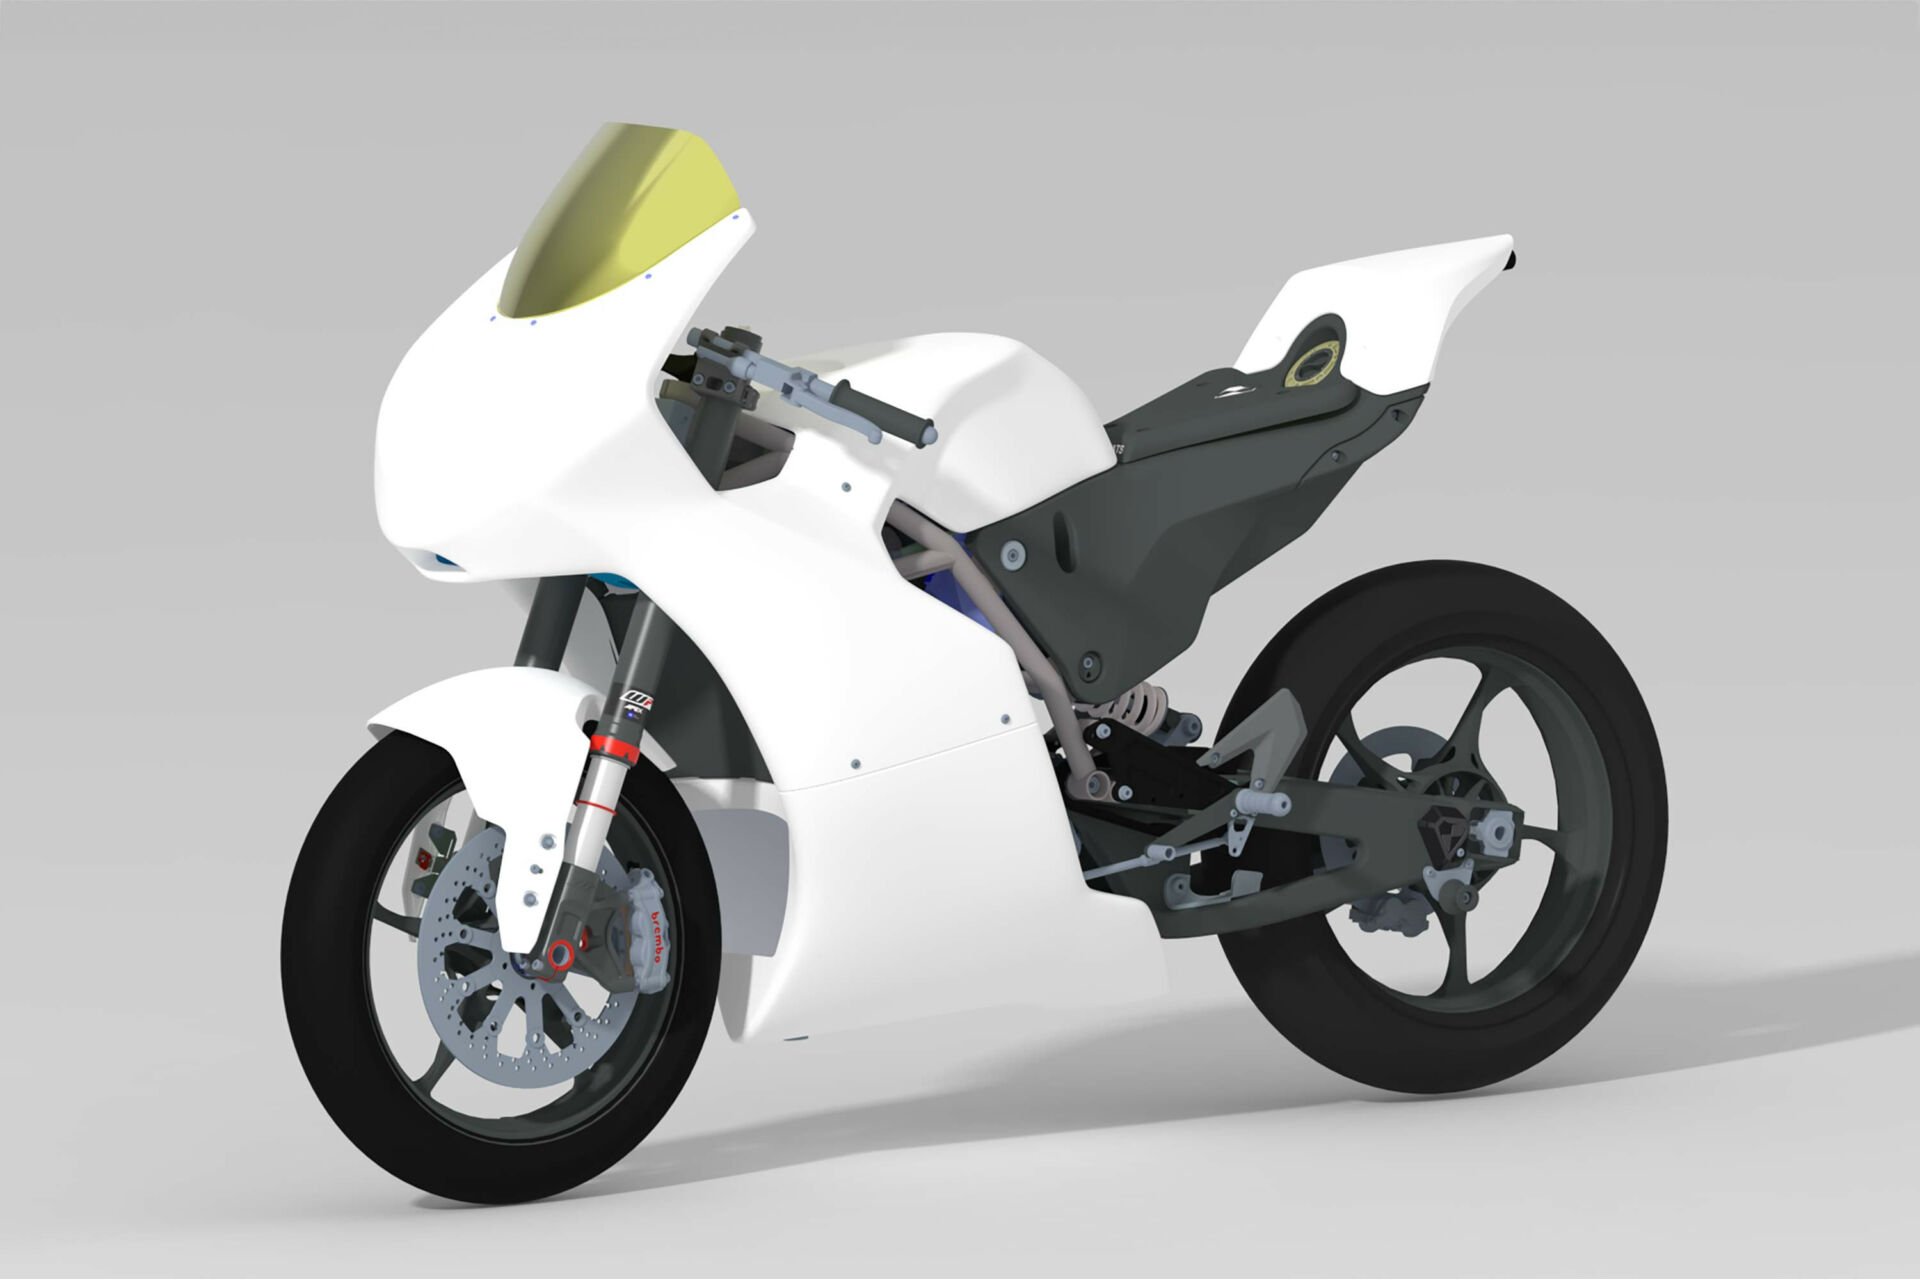 A rendering of the 2025 Krämer APX-350 MA race bike that will power the MotoAmerica Talent Cup. Image courtesy MotoAmerica and Krämer.